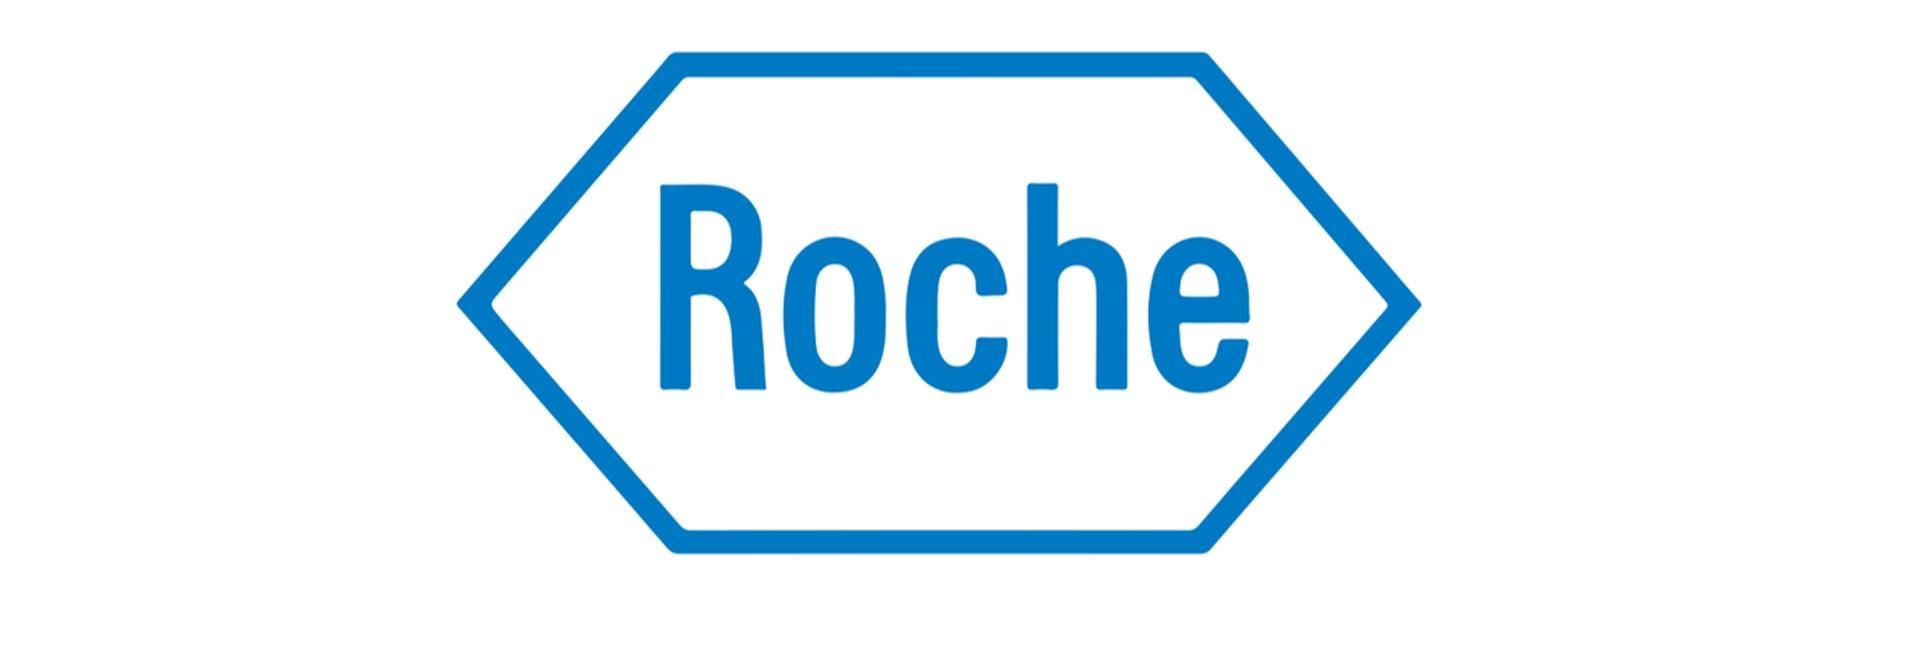 Roche is going to enlarge its Service and Solution Centre further in Budapest - VIDEO REPORT